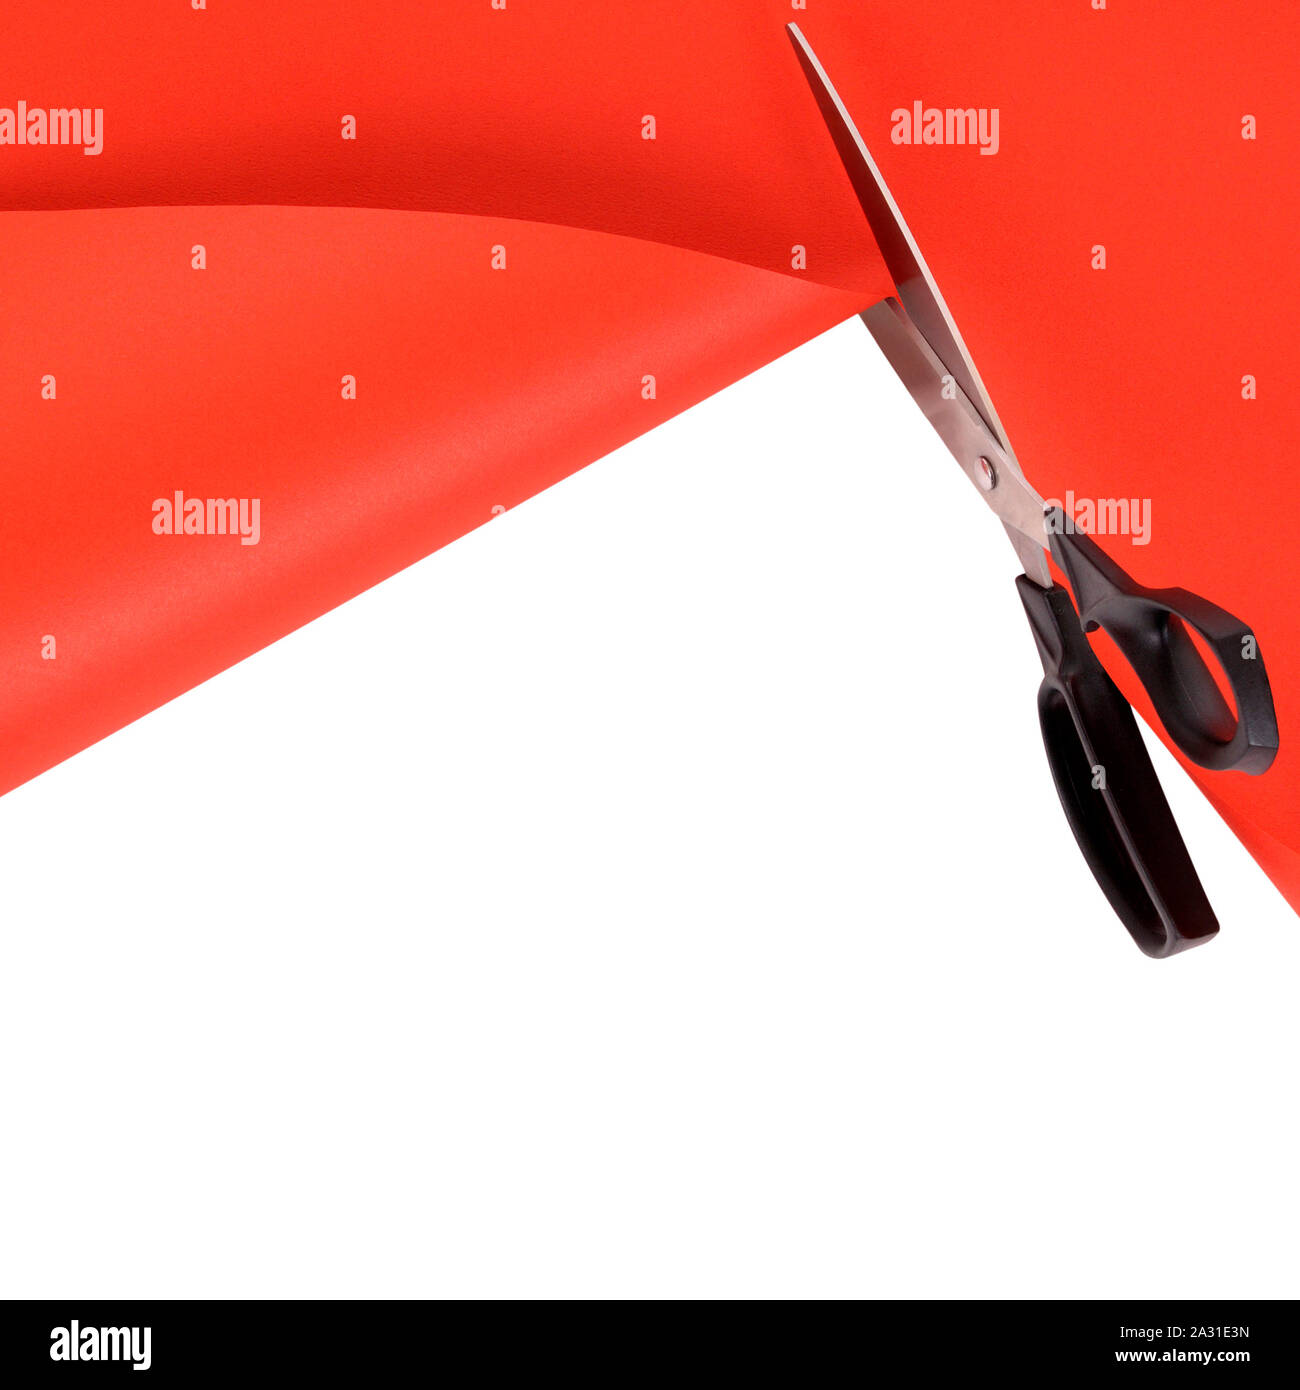 Scissors cutting red paper background Stock Photo